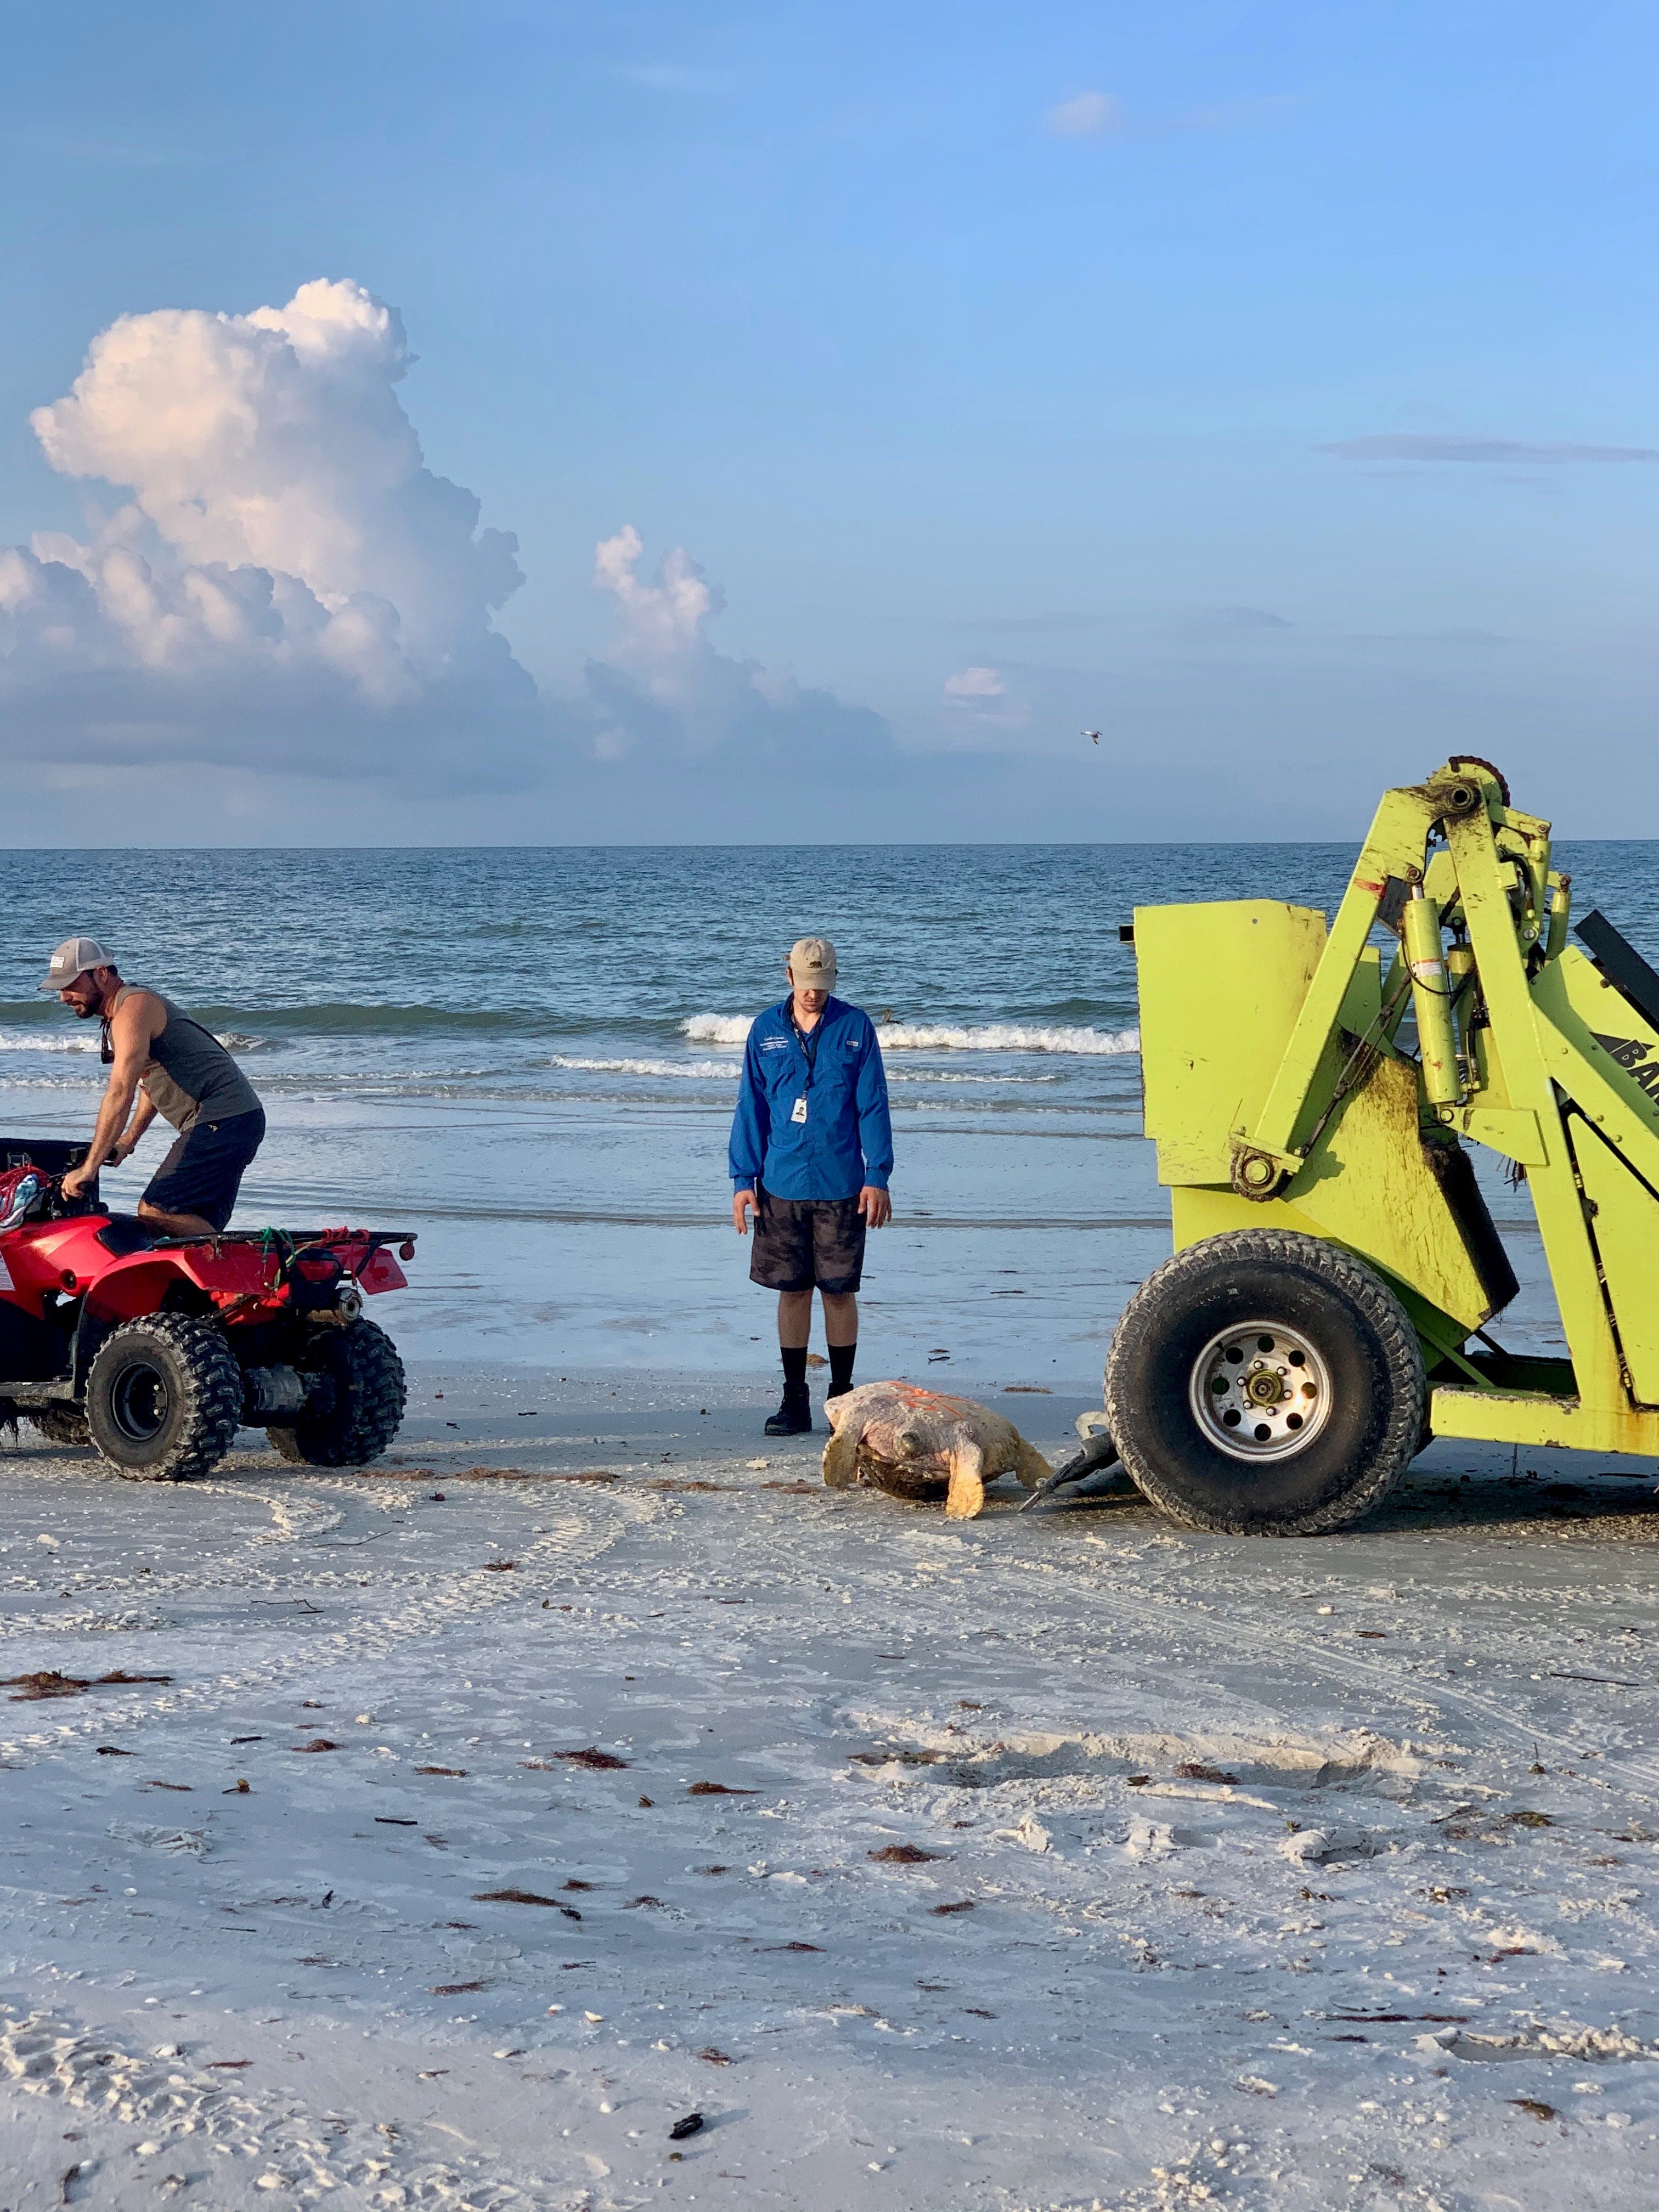 Joanna D. Metzger, a Marco Island resident, said she saw a dead loggerhead turtle that washed ashore close to the JW Marriott Beach Resort during her morning walk on Oct. 17. In the picture, government workers move the dead turtle with heavy machinery.